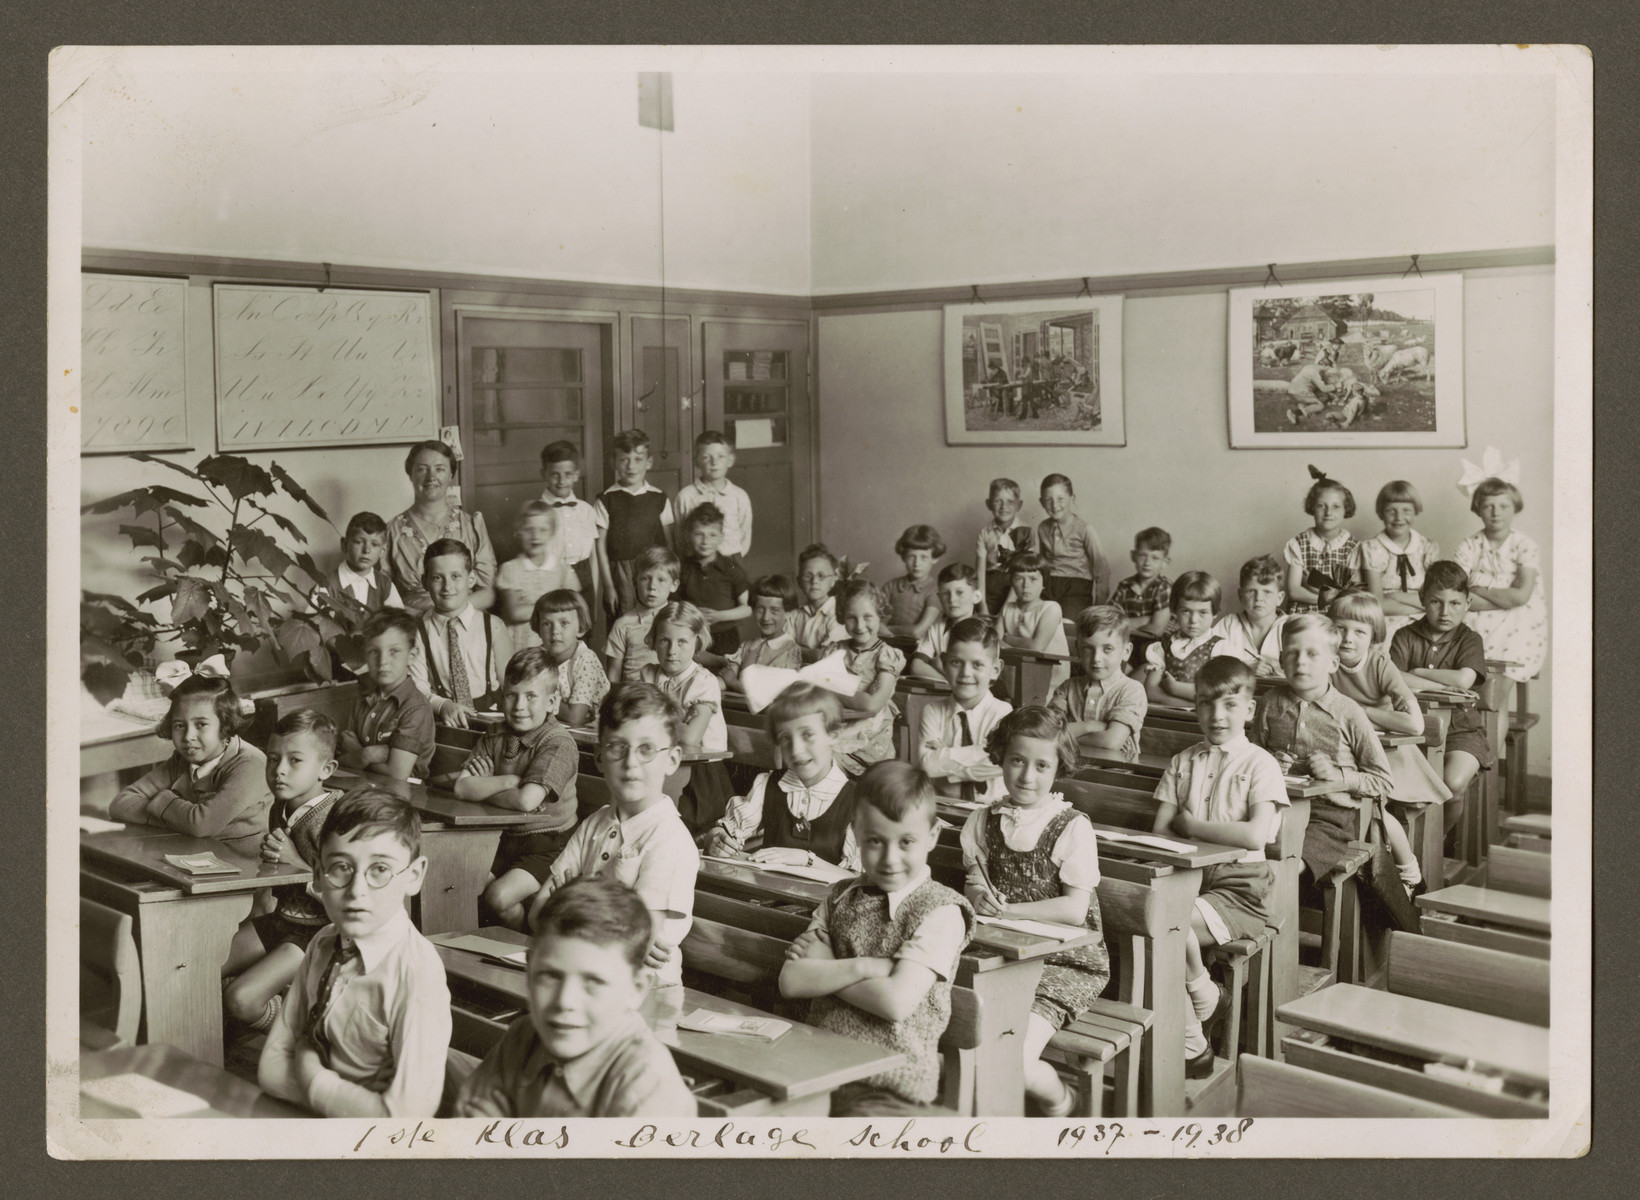 Group portrait of children in an elementary class in the Berlage school in Amsterdam.

Elisabeth Rodrigues is pictured in the middle, second from the left with dark hair.